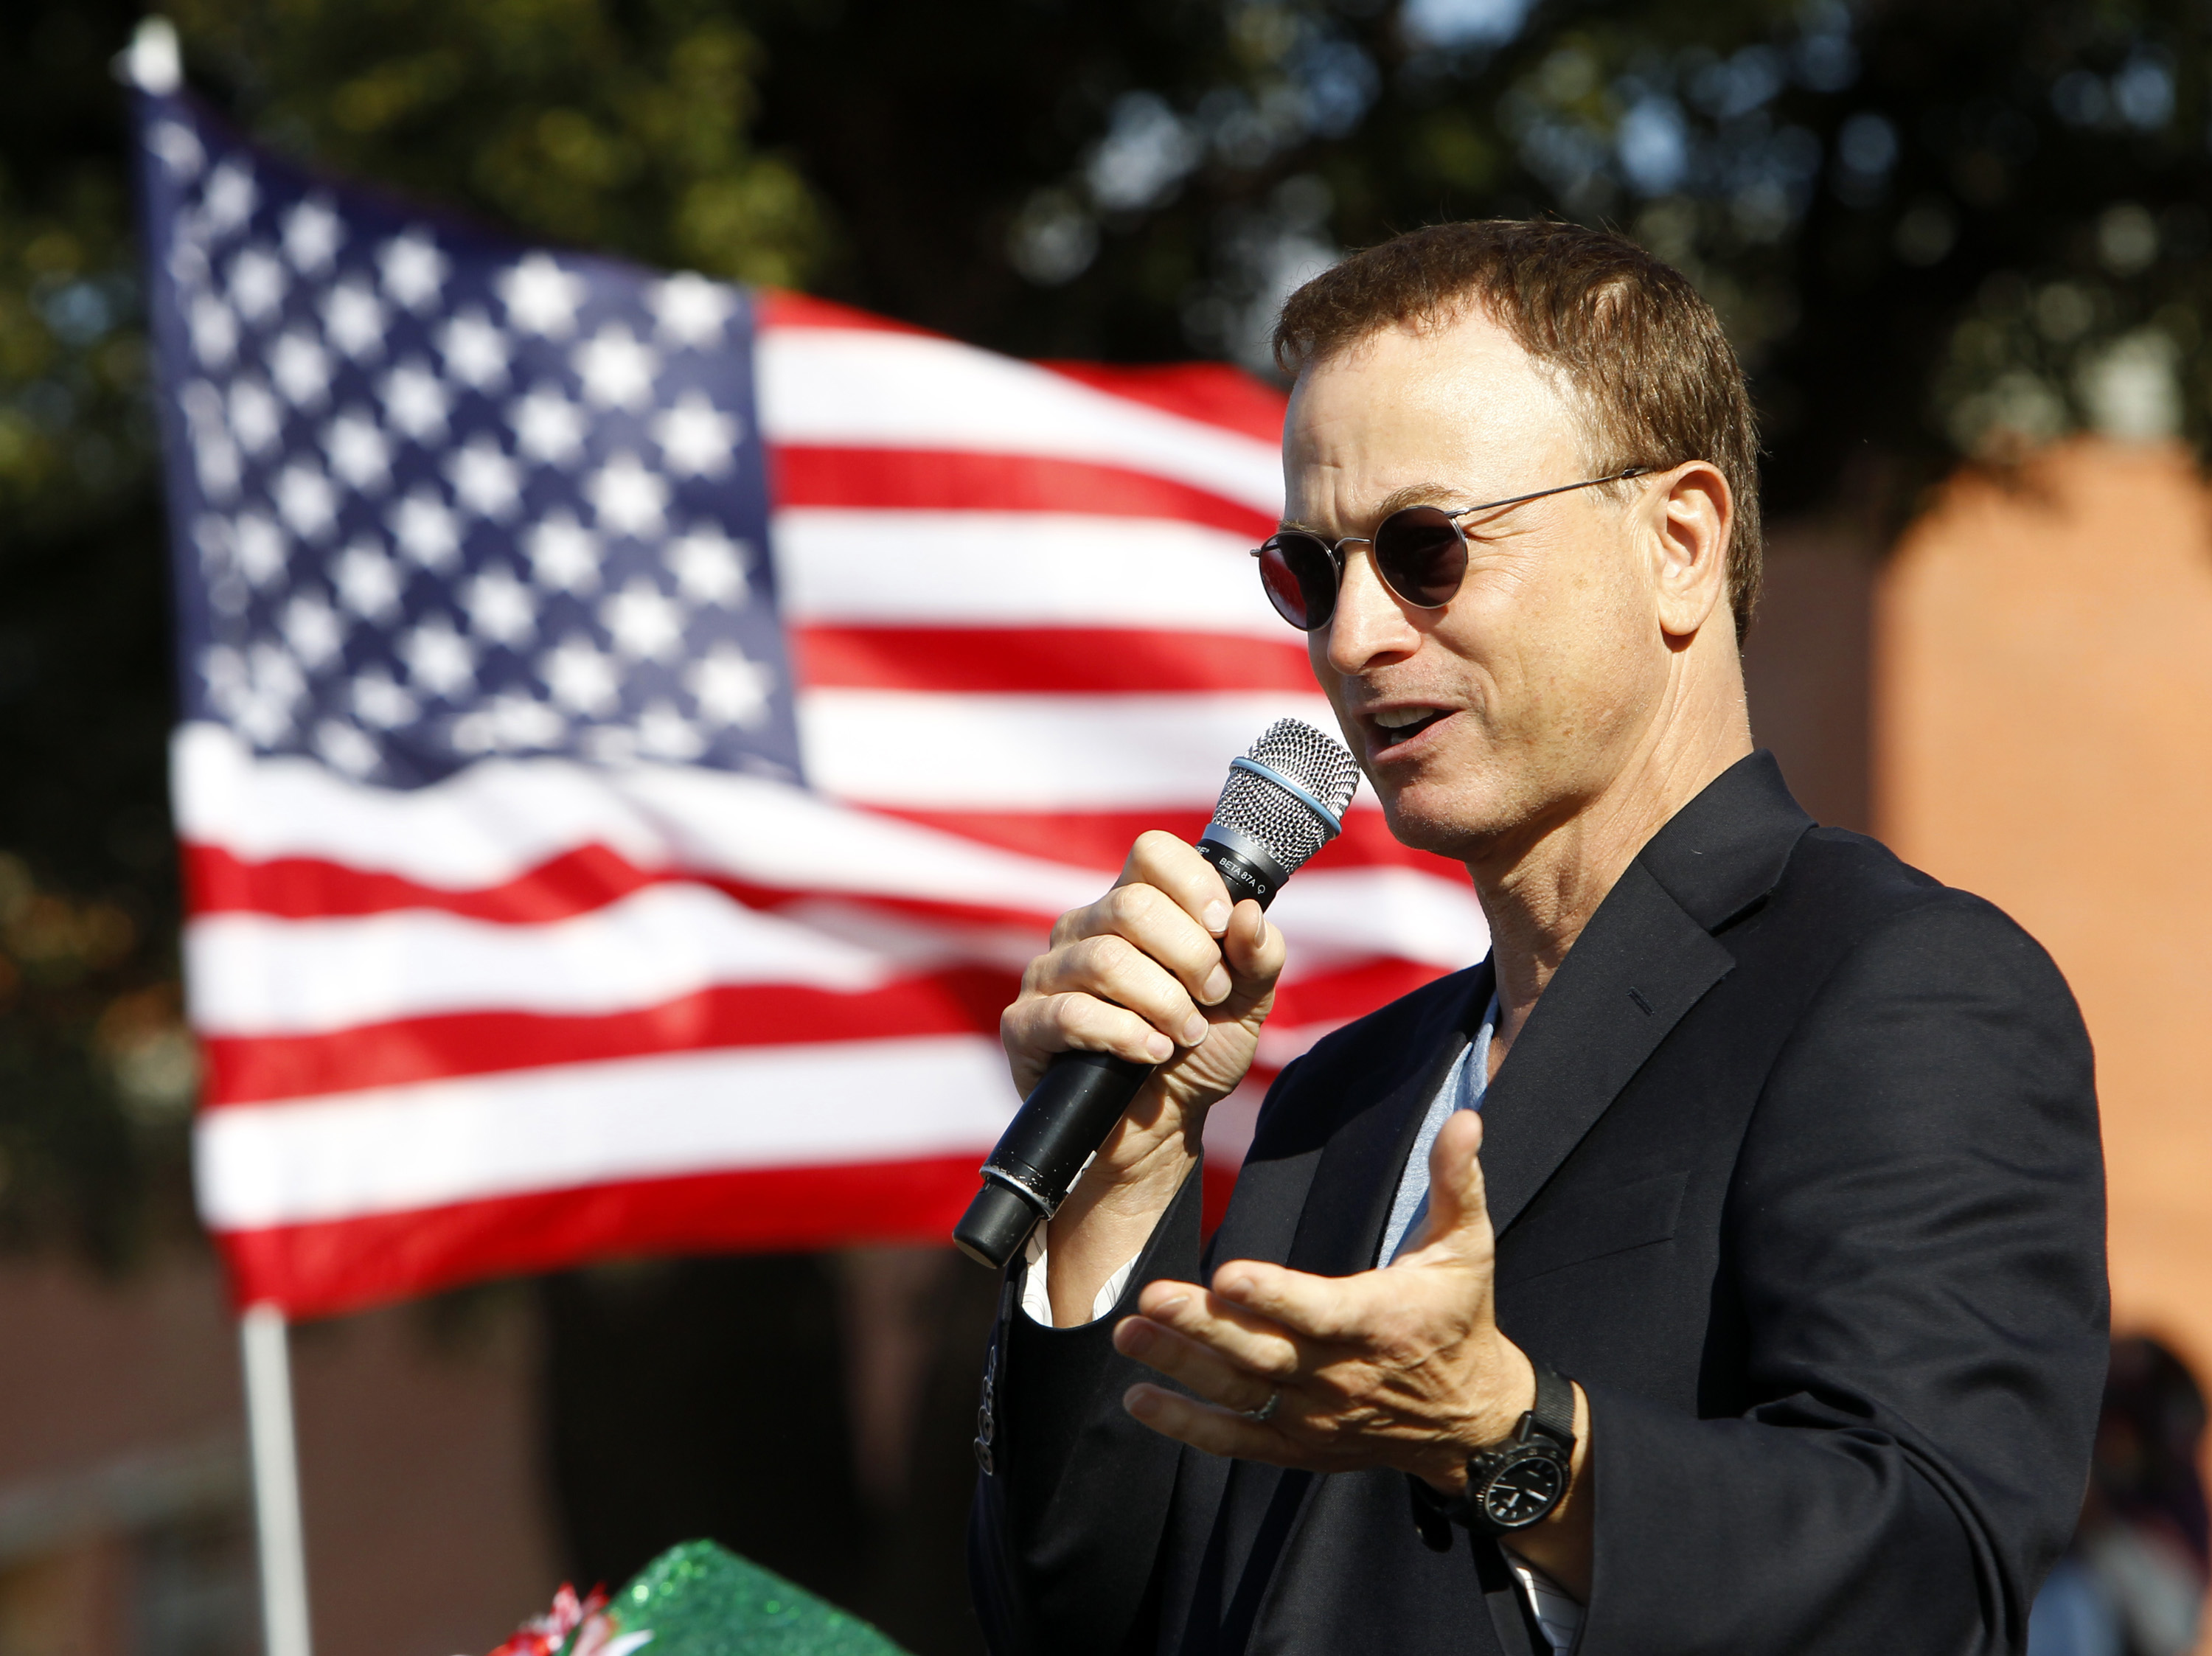 Gary Sinise speaks to the crowd at the Snowball Express event in the Stockyards Sunday, December 2, 2012, in Fort Worth, Texas. His band, the Lt. Dan Band, performed later that day for the crowd at Billy Bob's Texas | Source: Getty Images